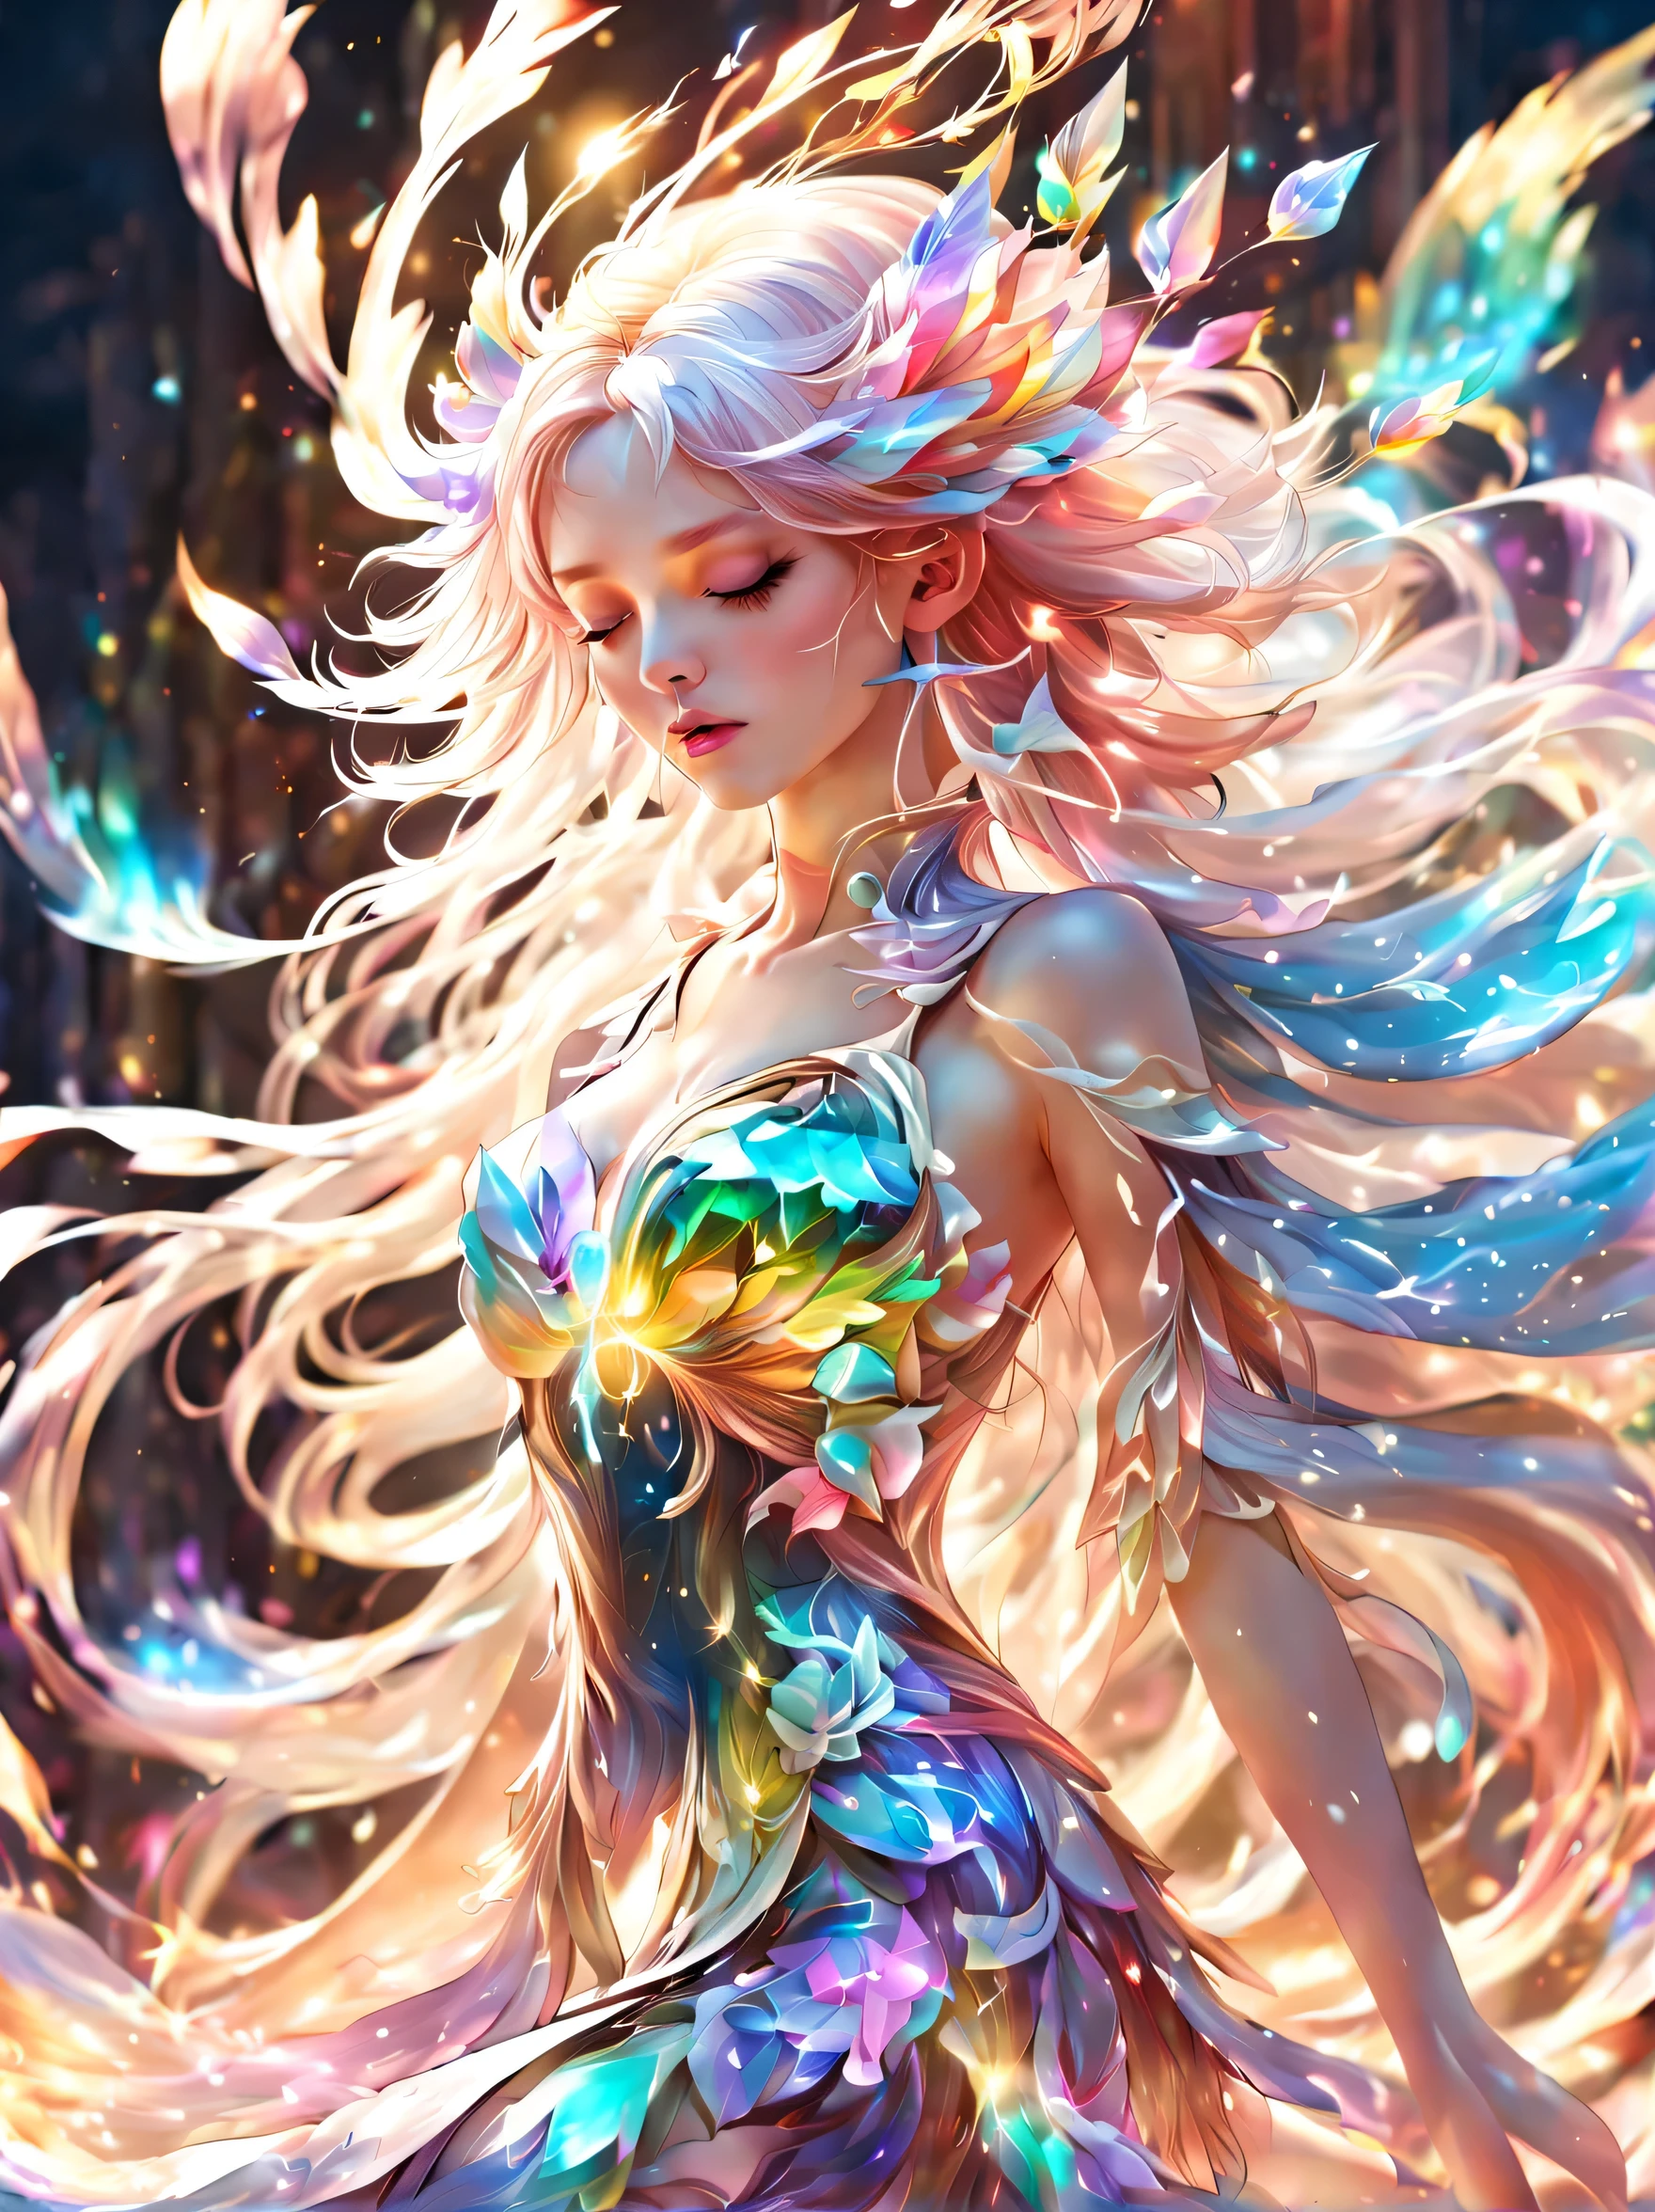 (masterpiece, highest quality:1.2),Wind Spirit,become familiar with,magic effect,light,Very light, Artistic, Artist, color art, Use of magic,fancy,fantasy,beautiful,The highest masterpiece,masterpiece,3d,8K,Sparkling,rich colors,pastel colour,Cast colorful spells,become familiar with,Beautiful light and shadow,Sounds like fun, Isn&#39;t that so??,